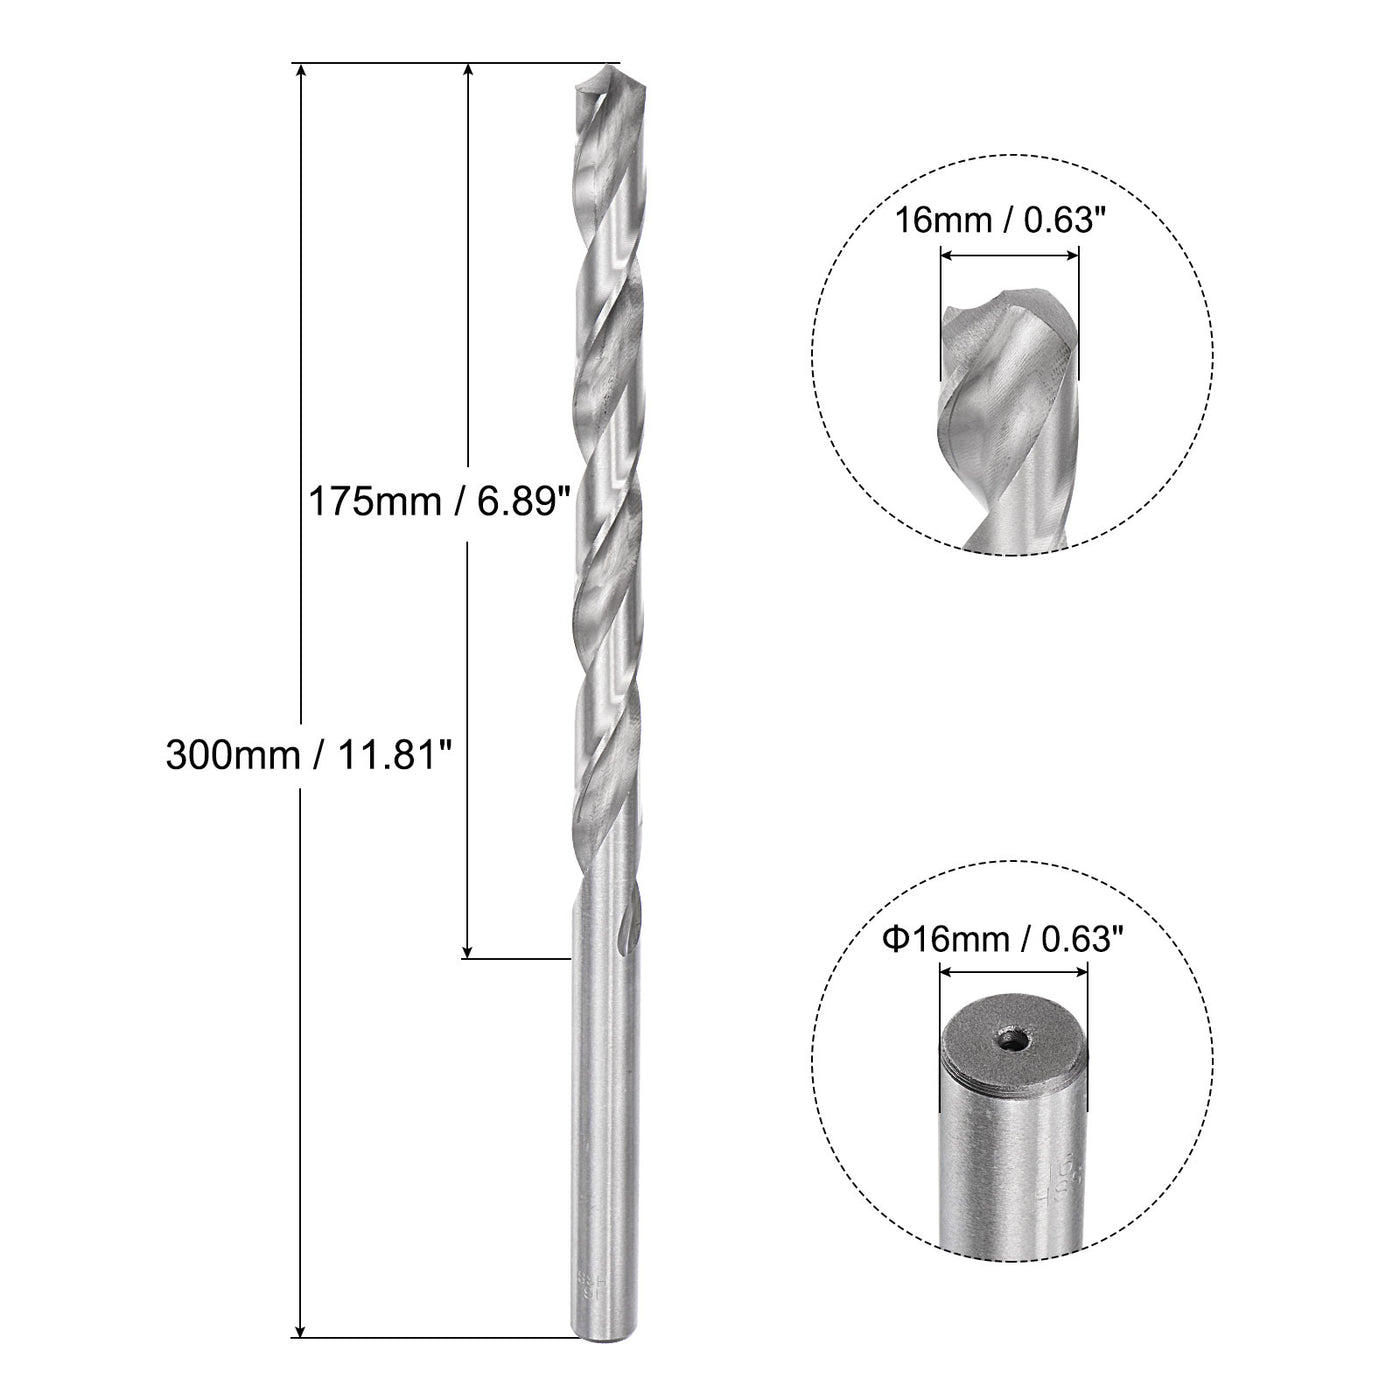 uxcell Uxcell 16mm Twist Drill Bits, High-Speed Steel Extra Long Drill Bit 300mm Length